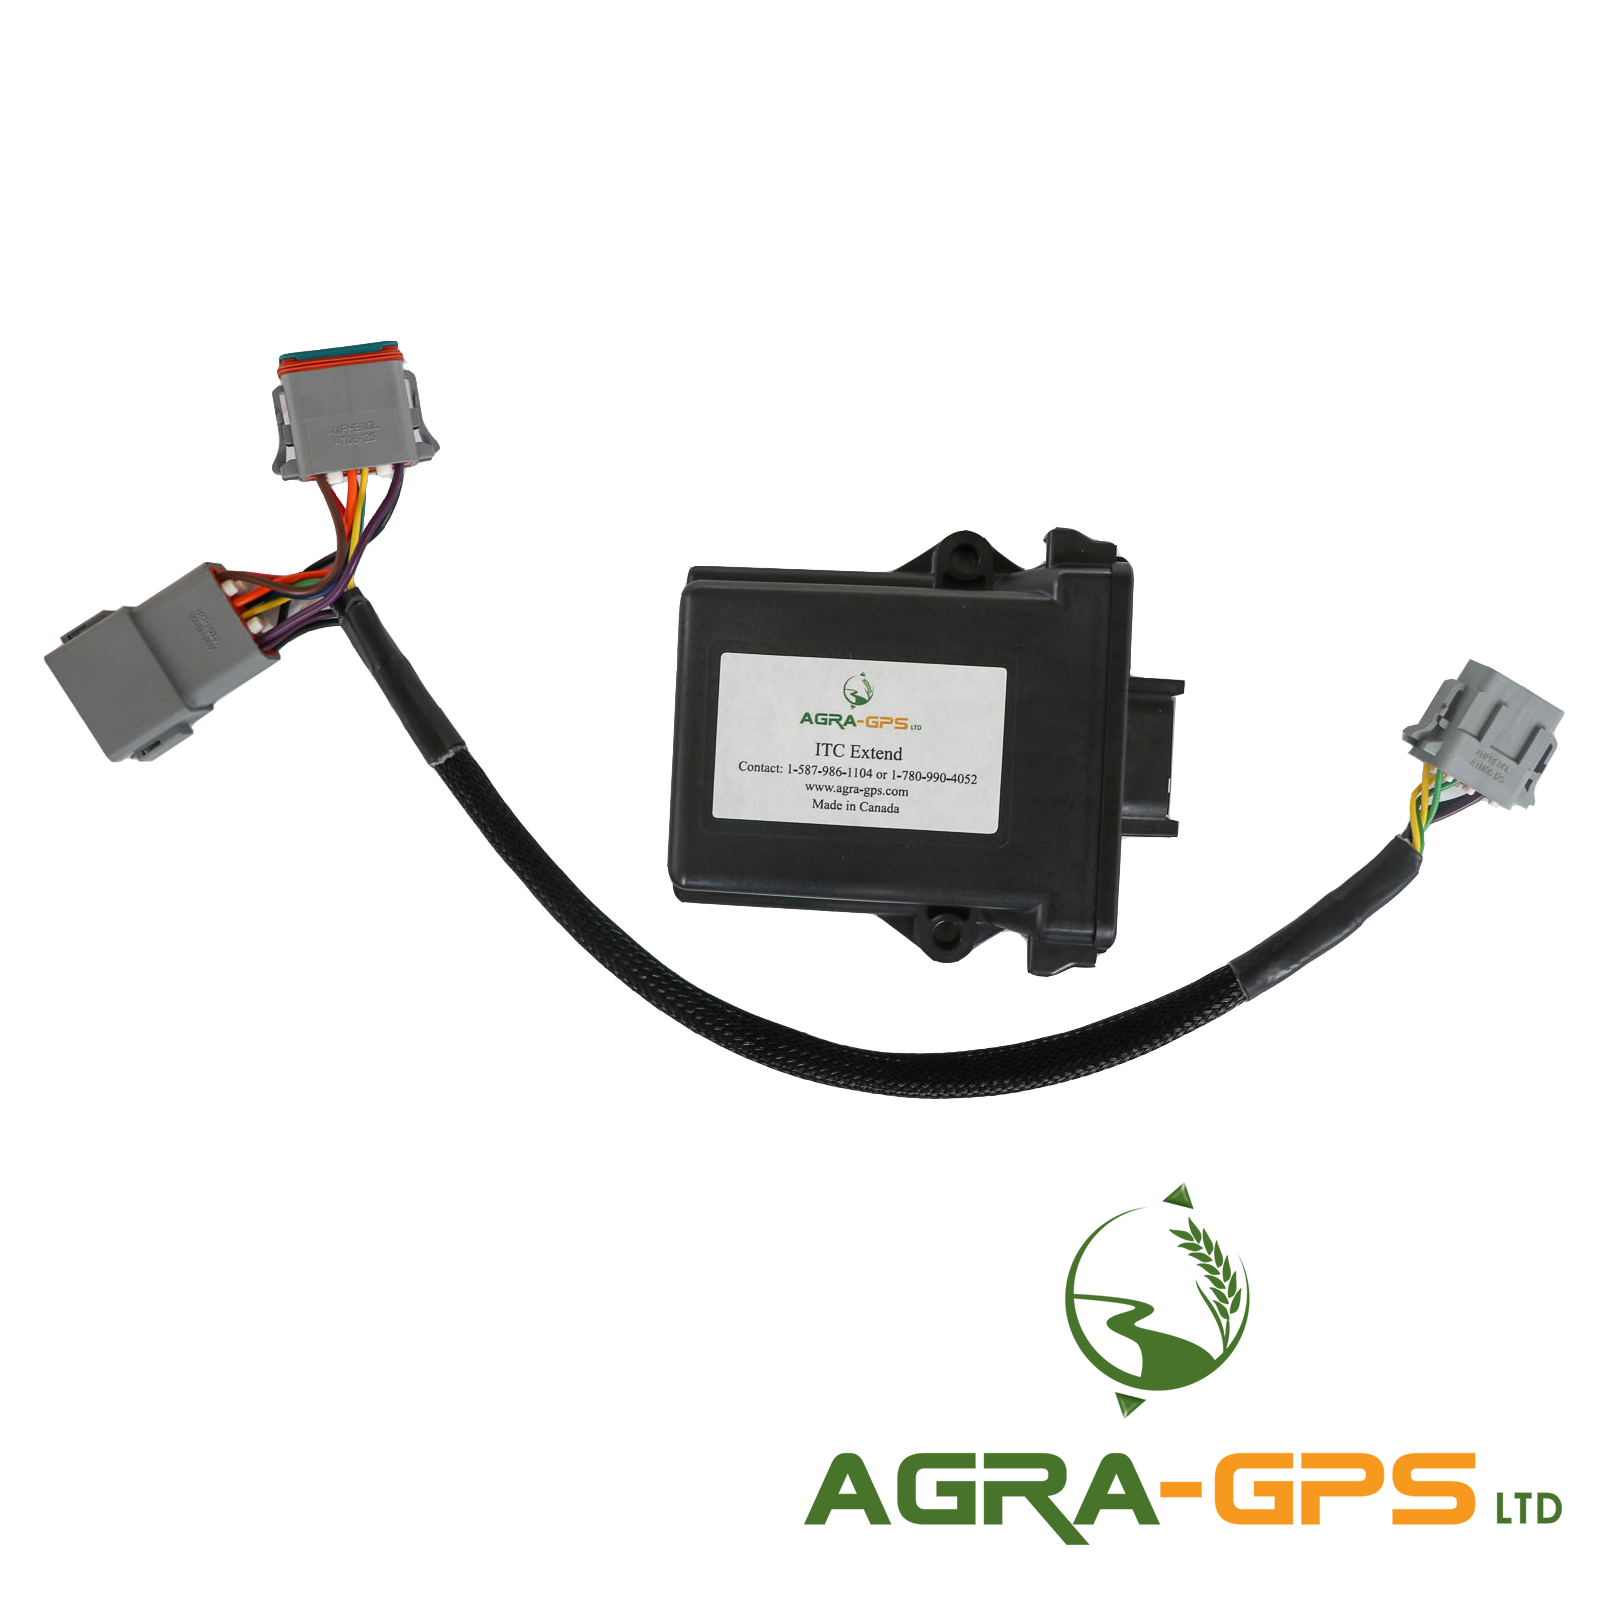 ITCextend Installation compatible with the John Deere ITC 1000 WAAS Signal